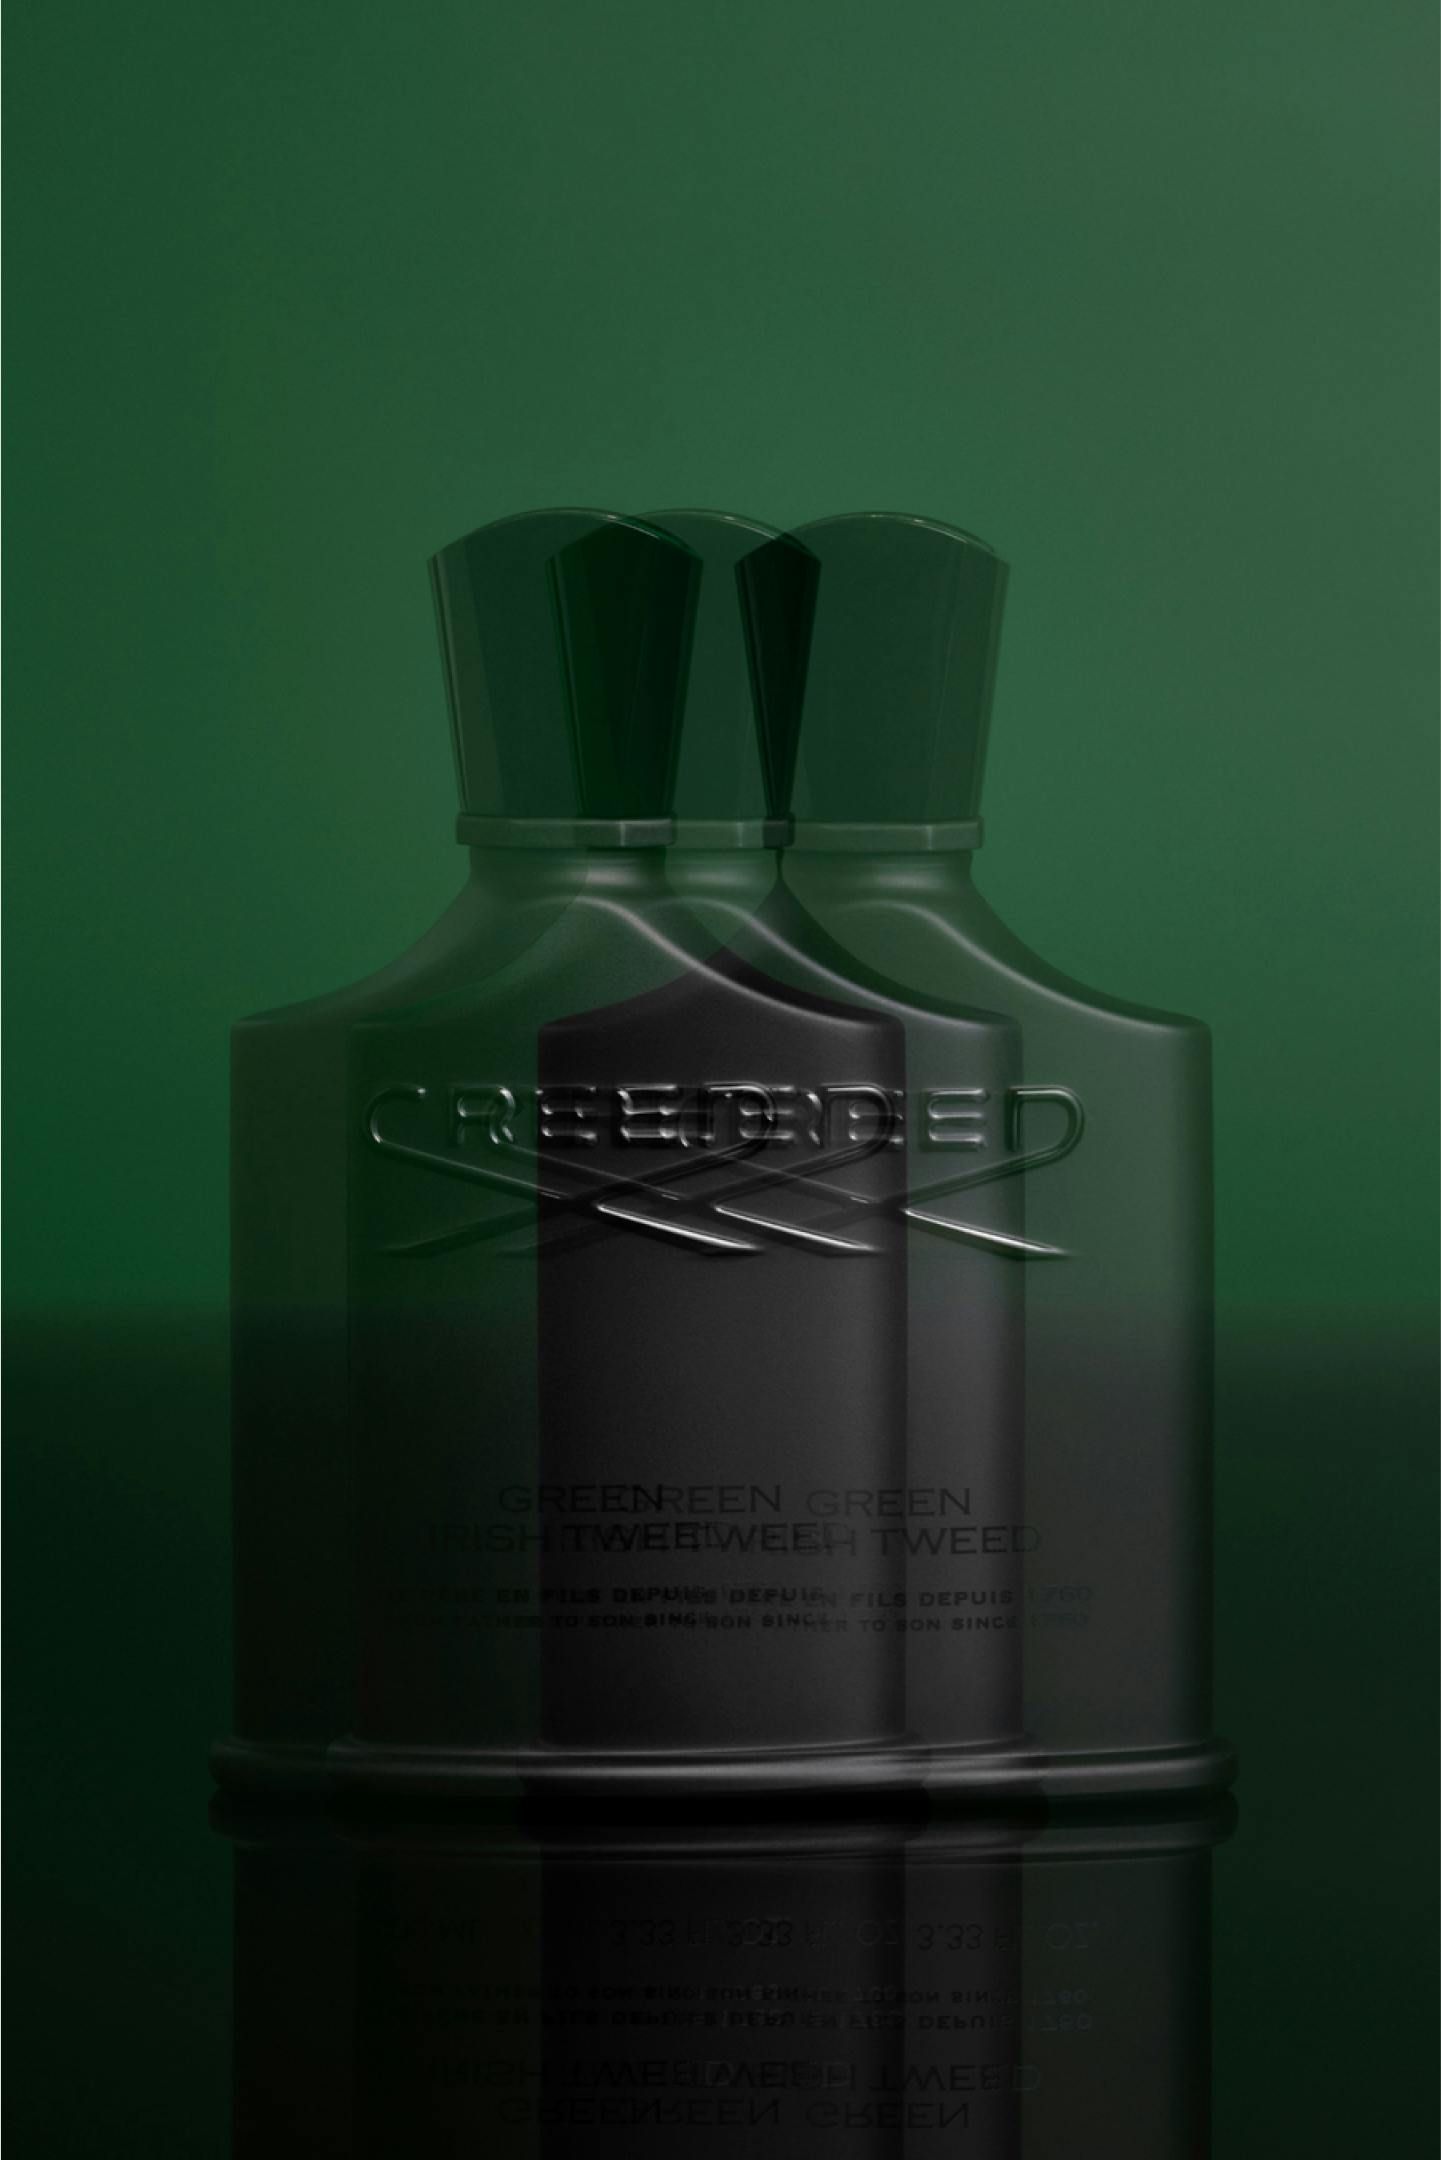 Blurry editorial image of Creed Aventus product